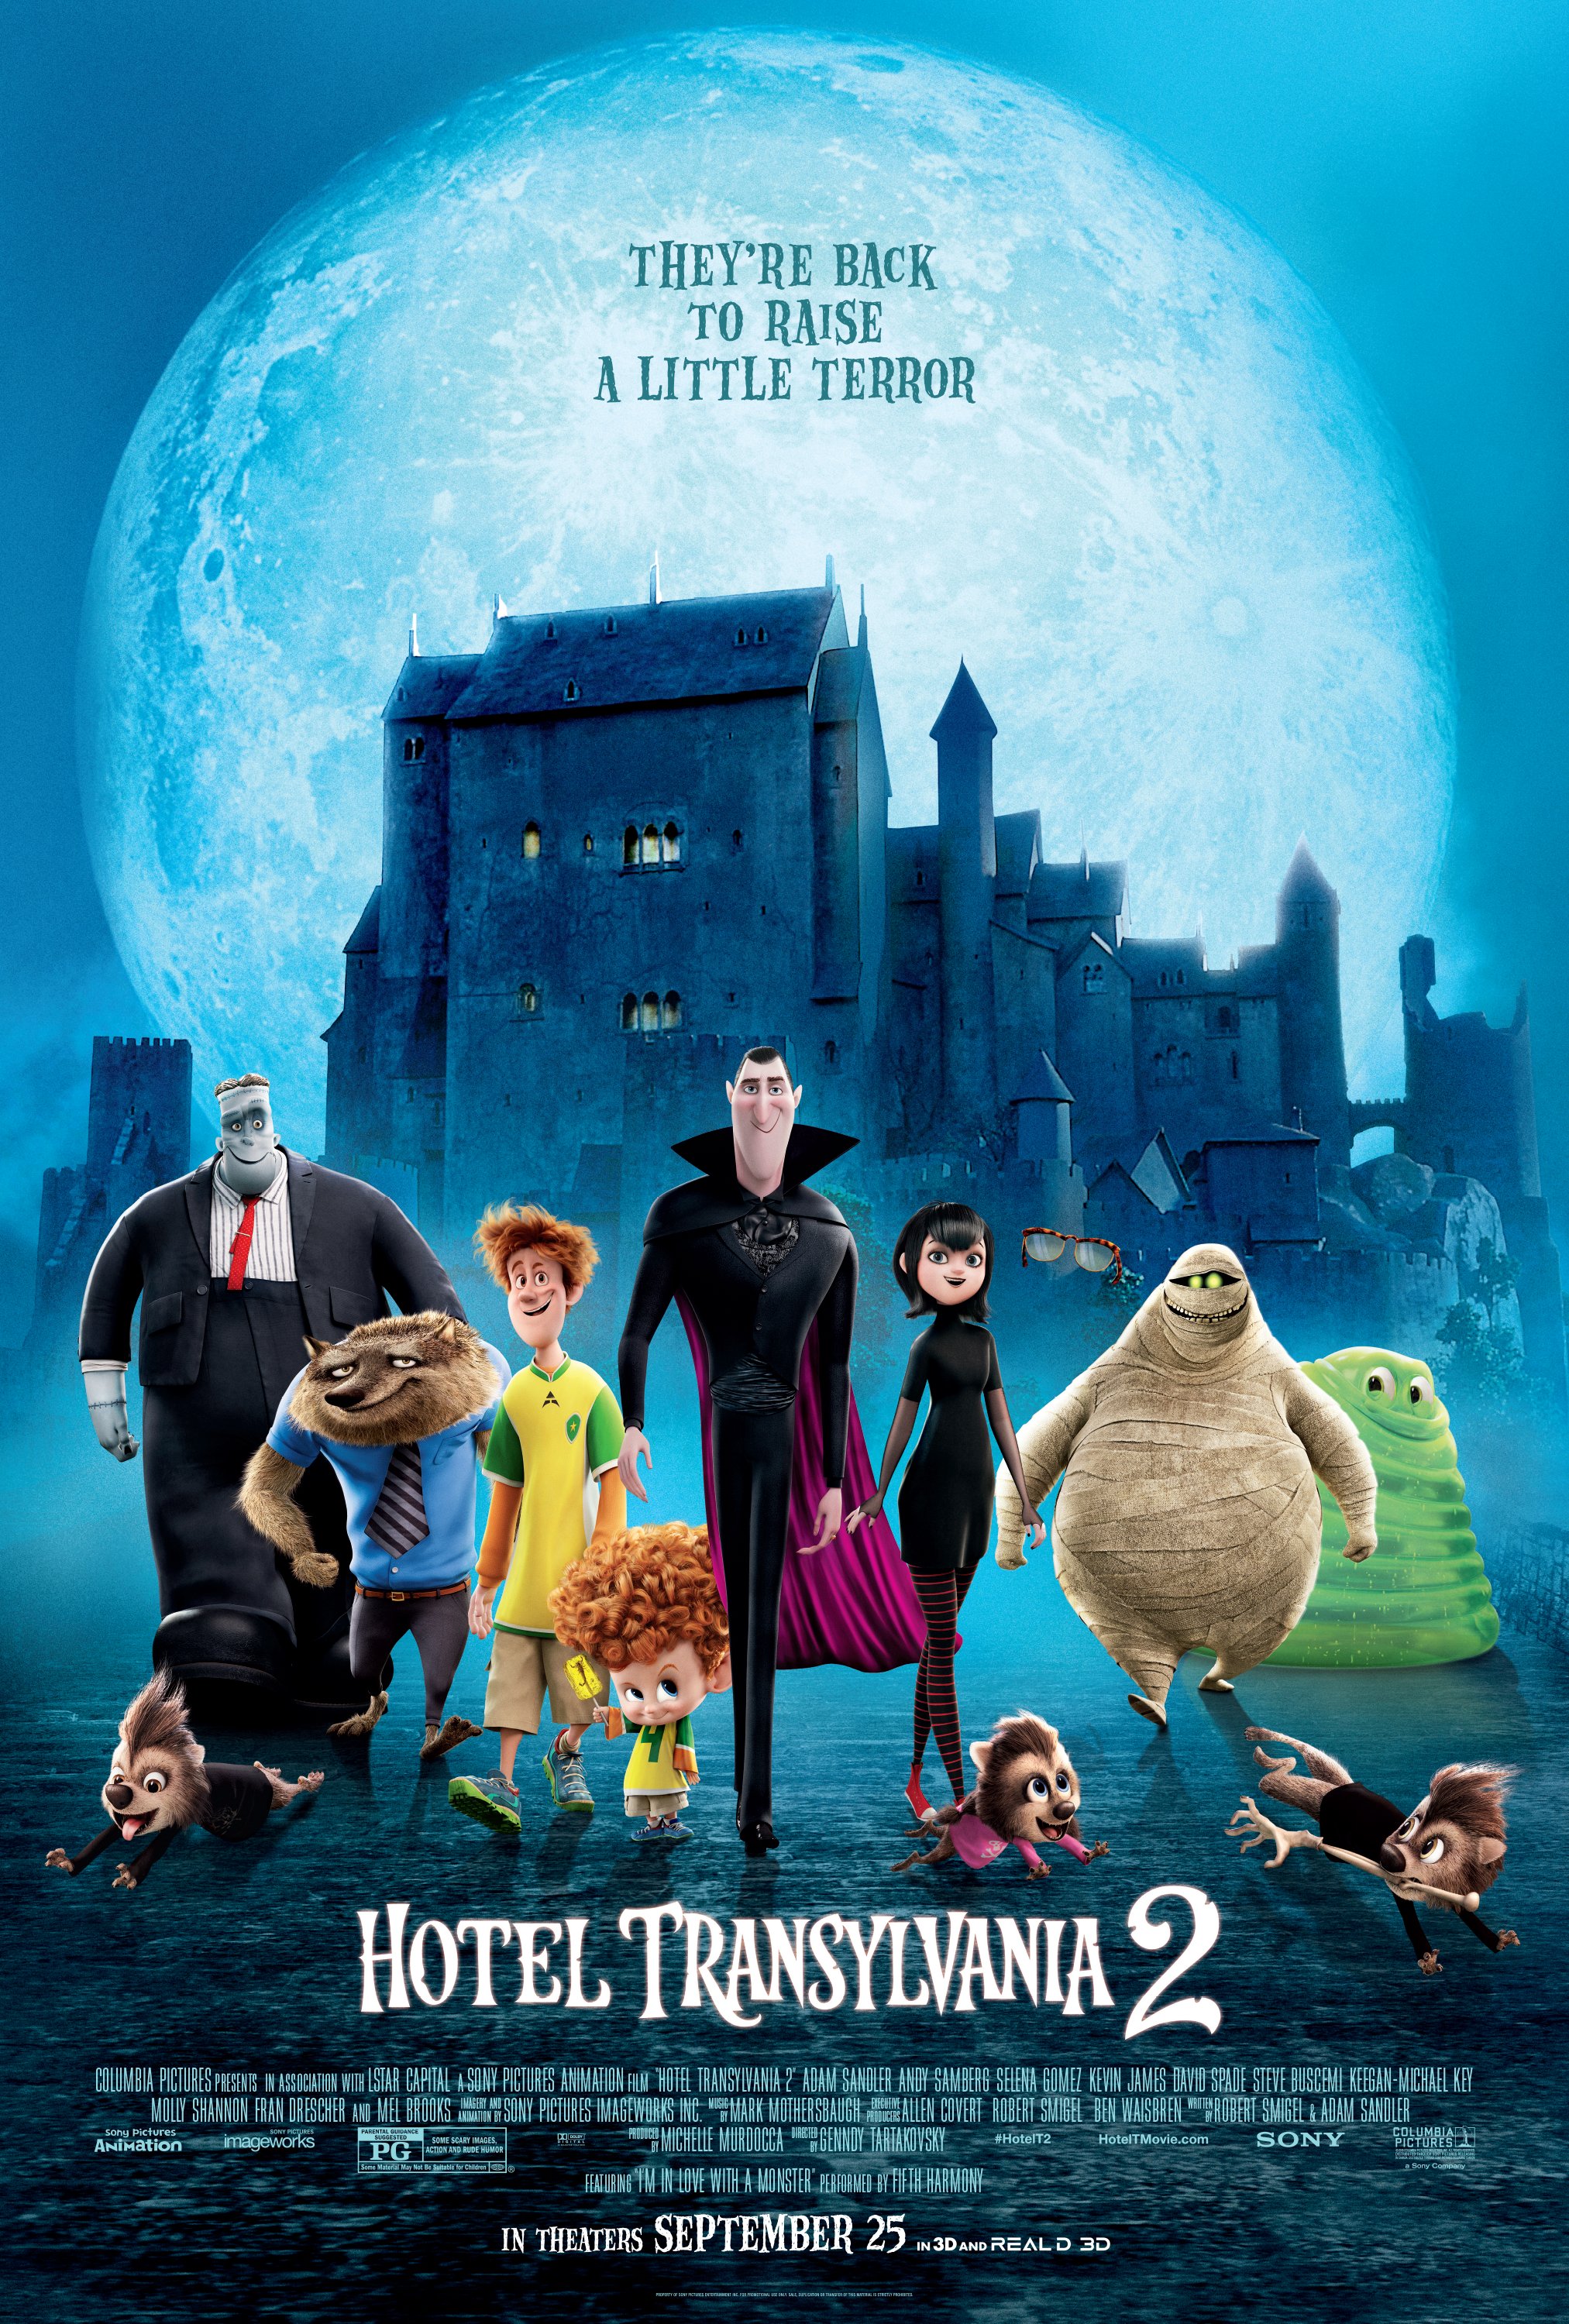 Hotel Transylvania 2 and Goodwill Help You Become Your Own Monster #HotelT2